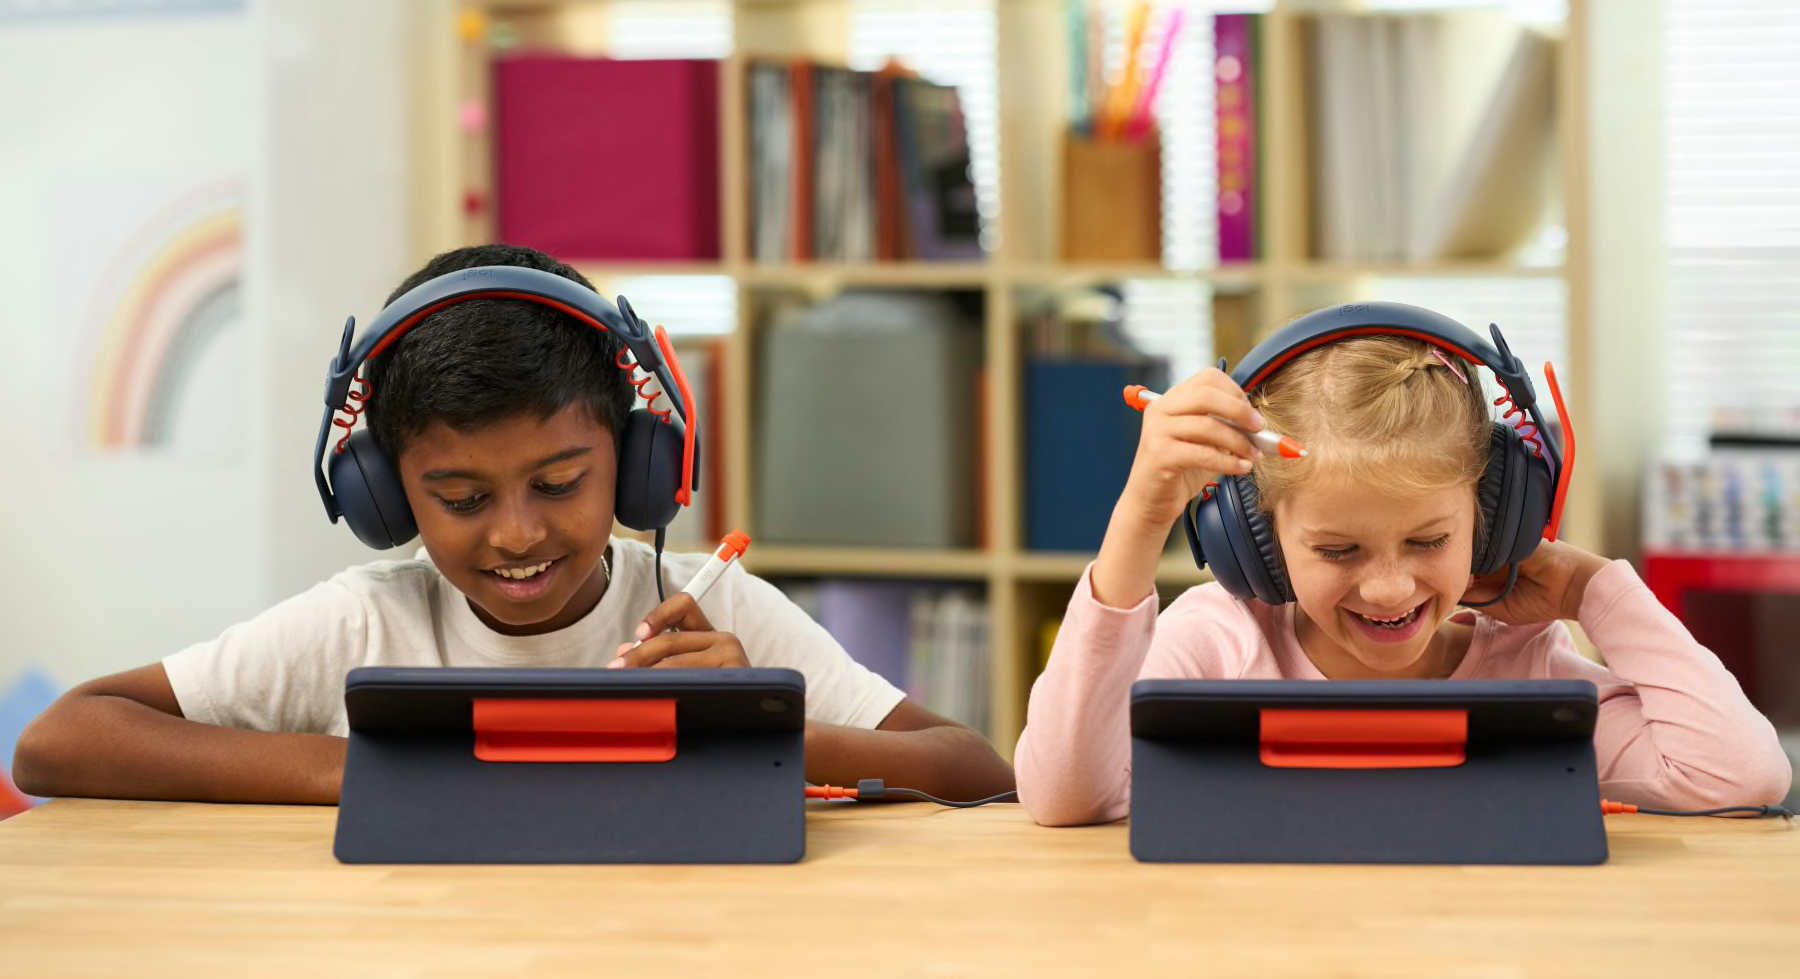 5 Strategies to lower classroom noise